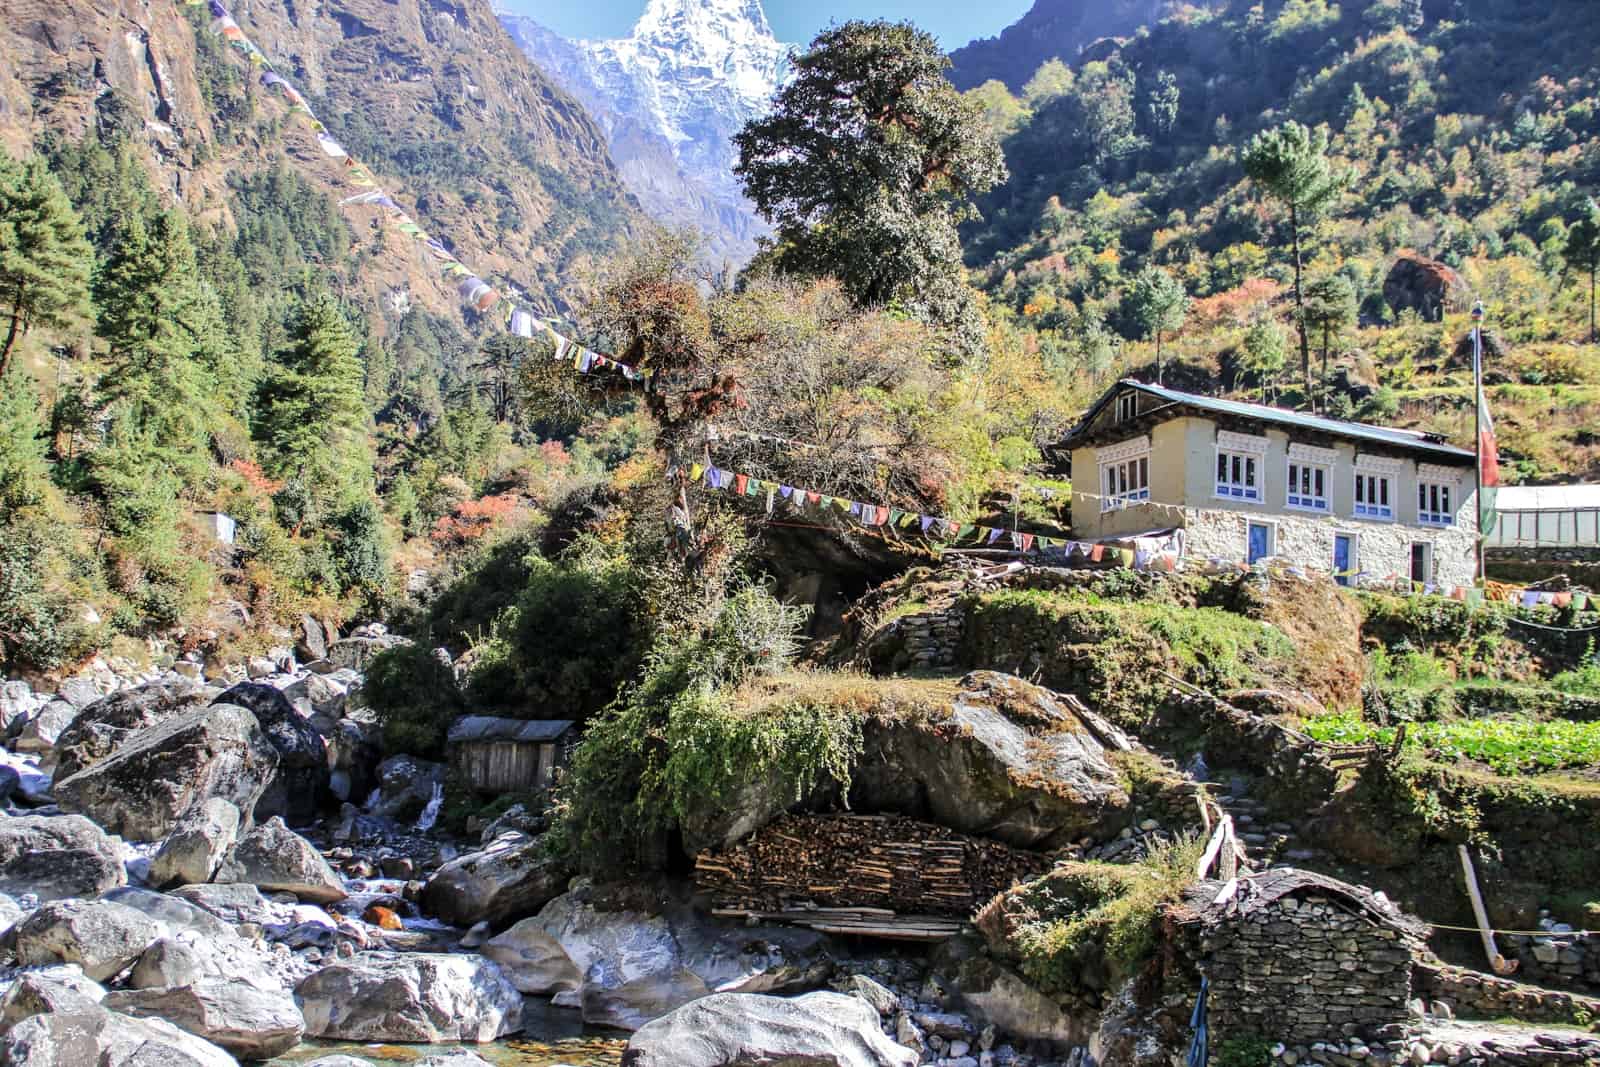 A typical Nepali teahouse on the Everest Base camp Trek route sits on an elevated green hillside next to a rocky stream. In the background the Himalaya mountain peaks poke through the forest trees